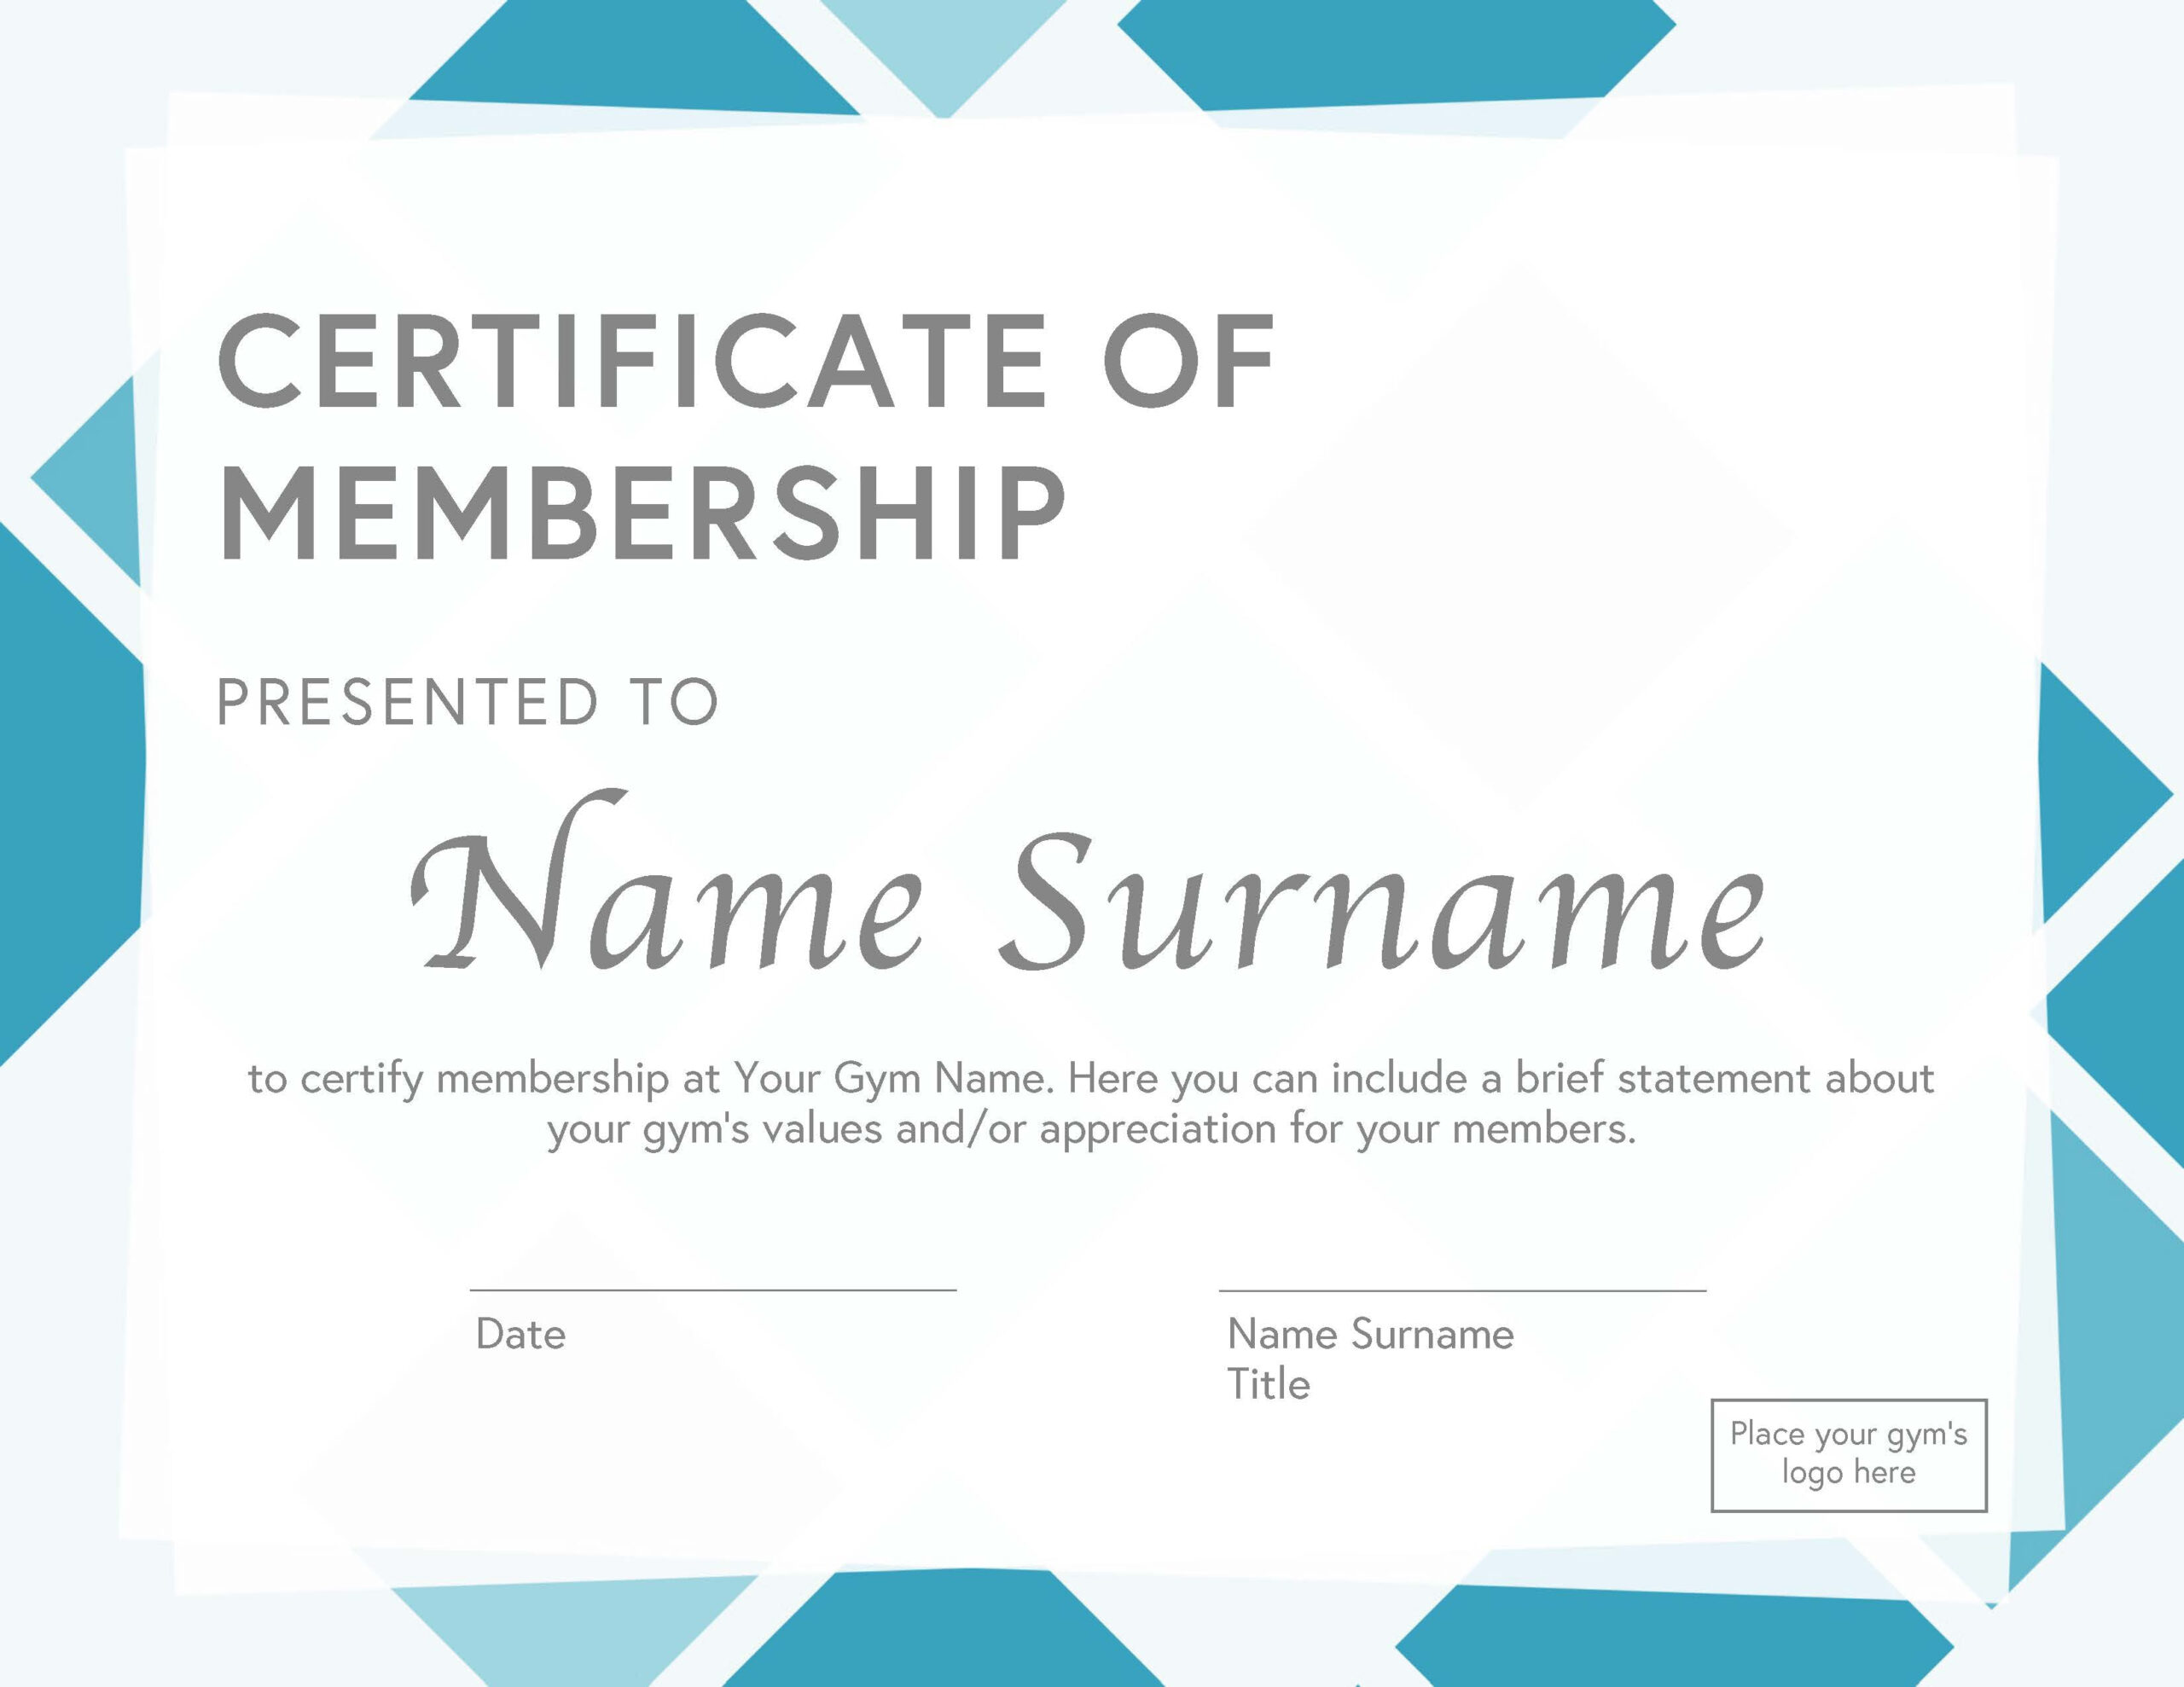 10 Free Membership Certificate Templates for Any Occasion